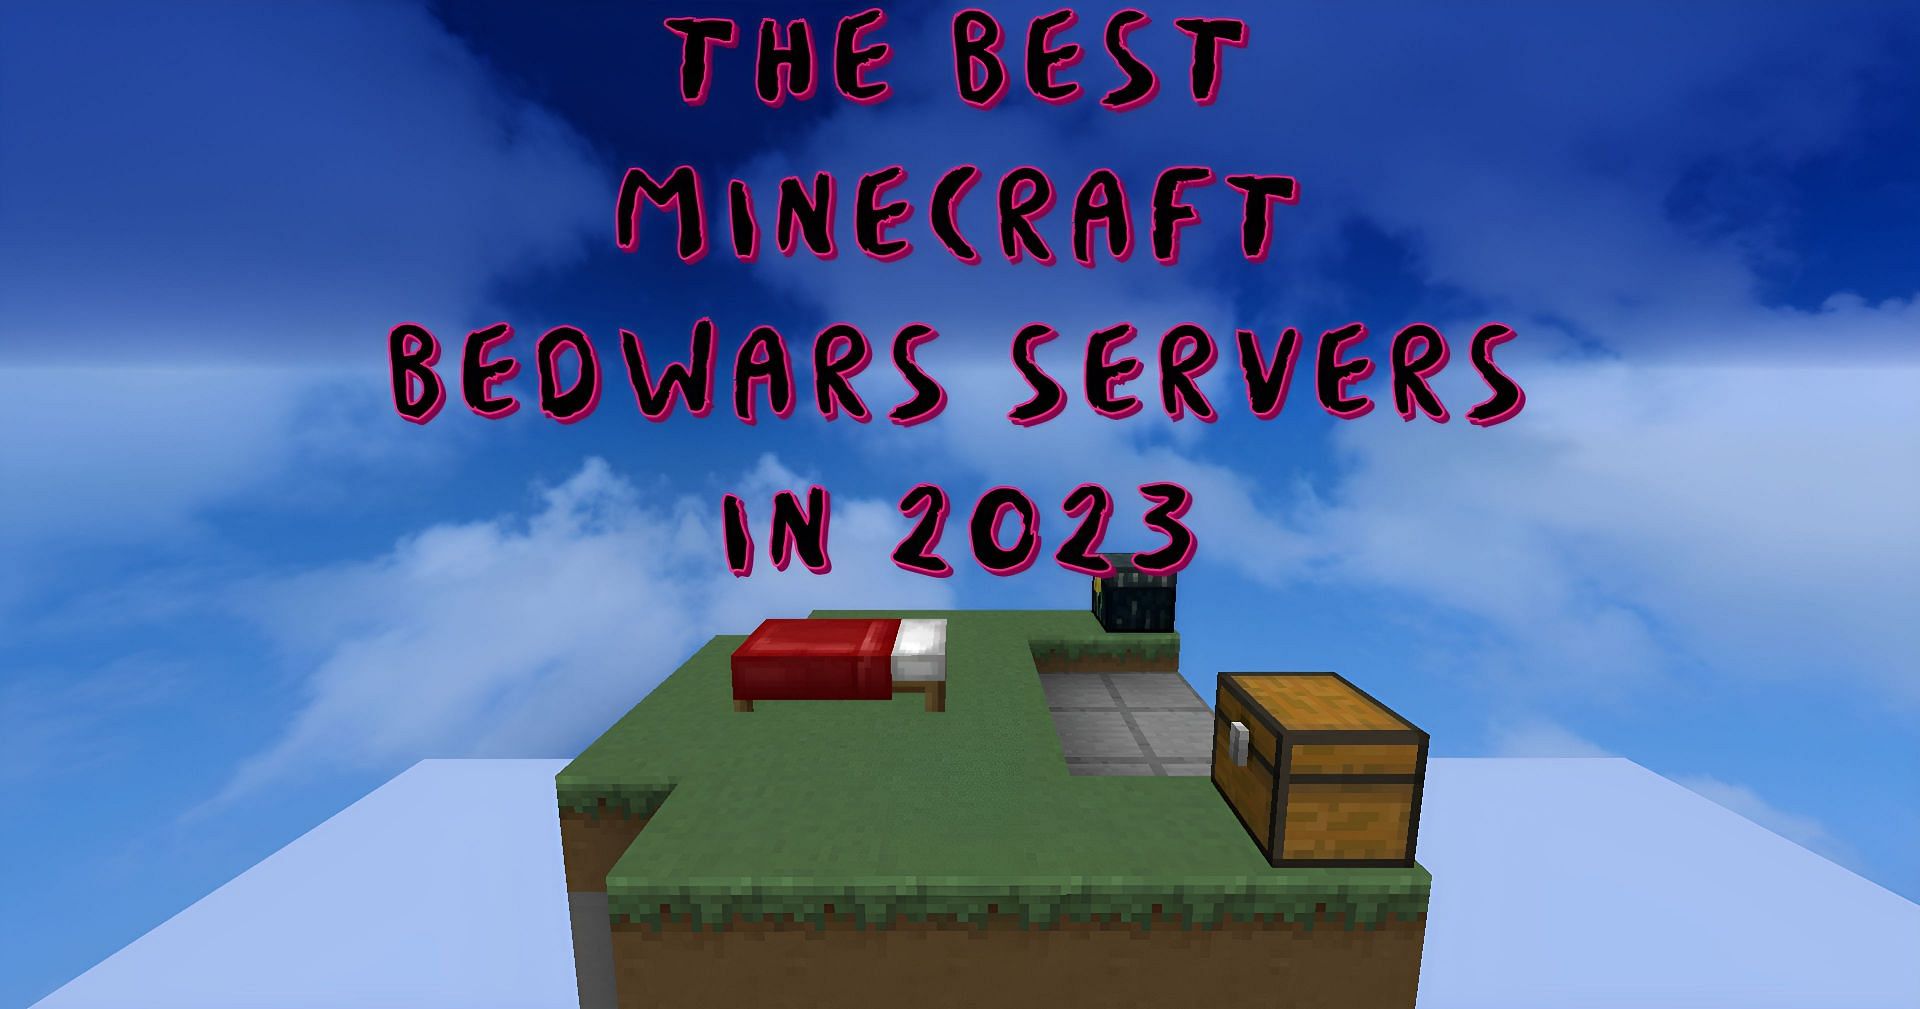 Minecraft bedwars servers are action packed and amazing for those who love PvP (Image via Sportskeeda)